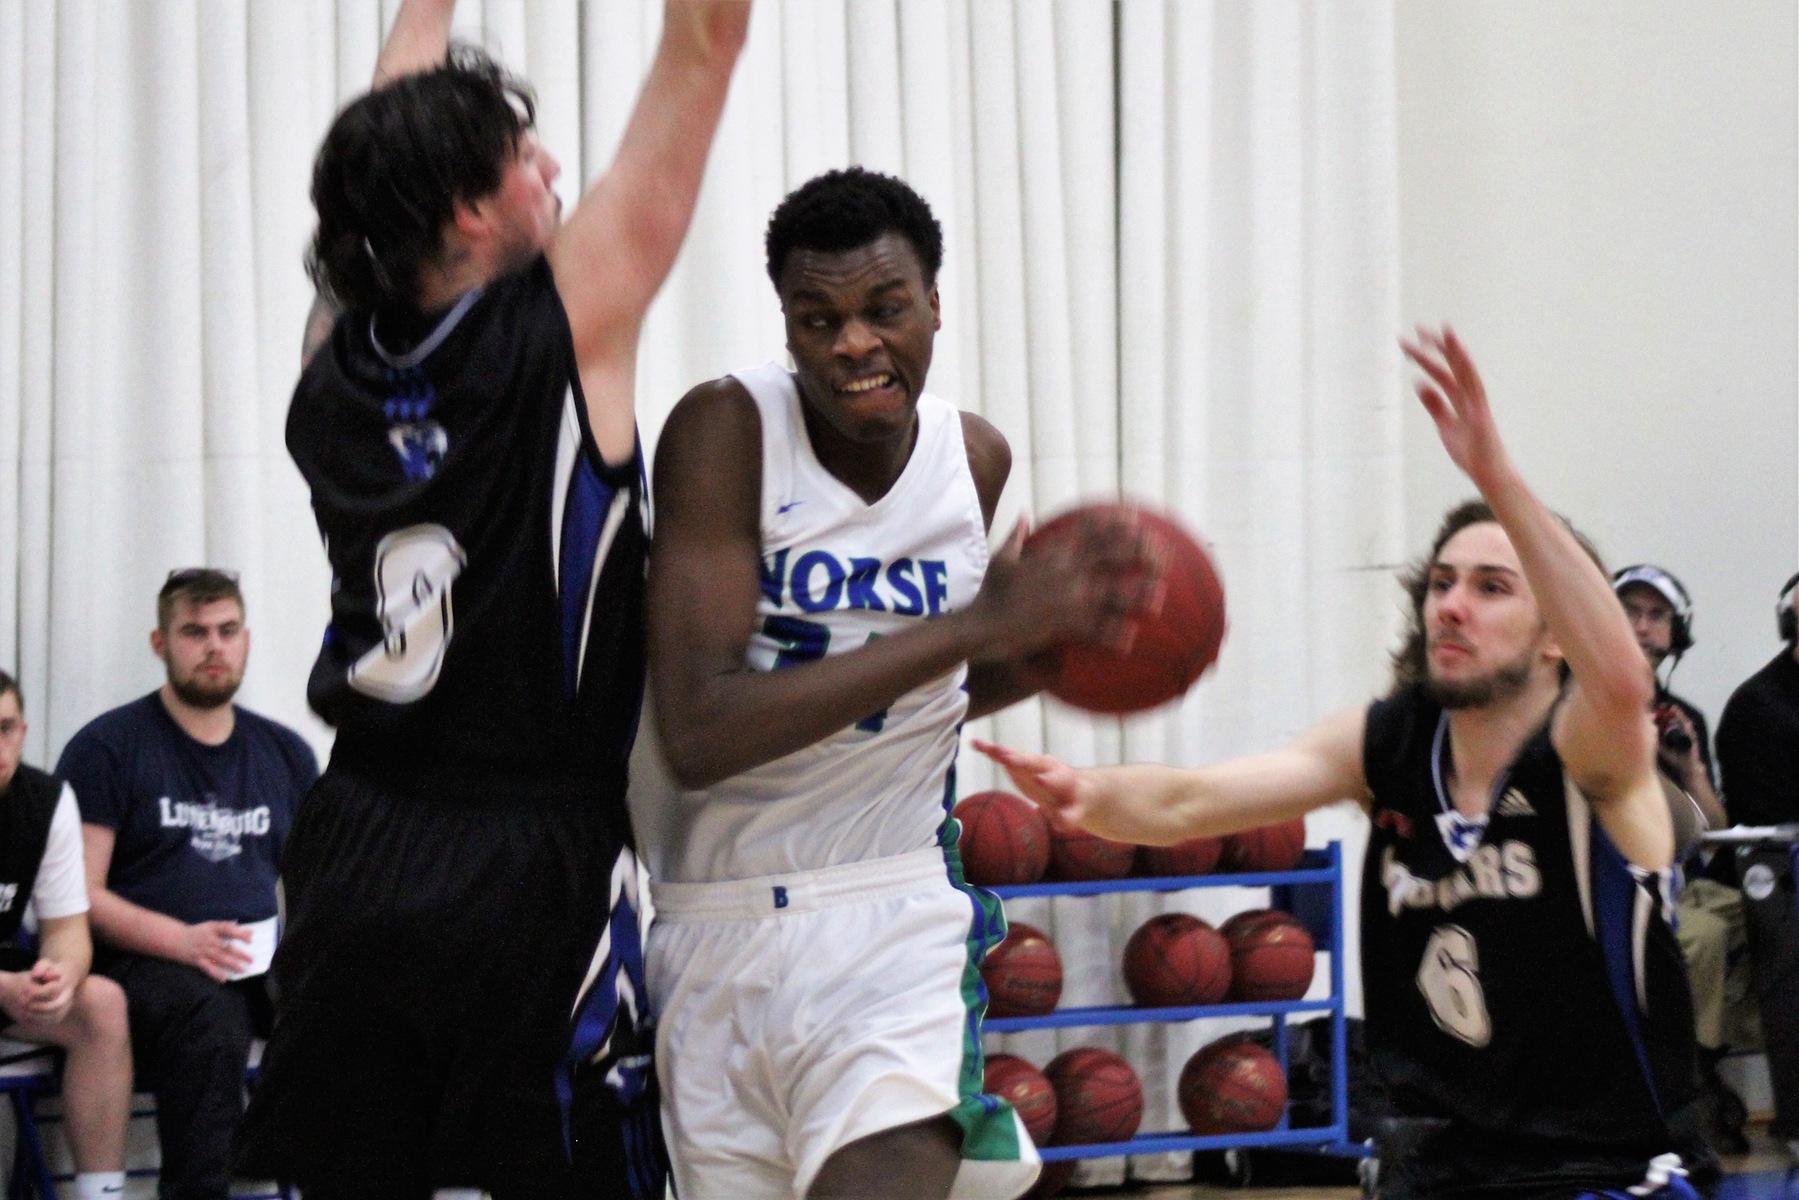 Kobi Barnes tries to get to the basket with a defender in his way